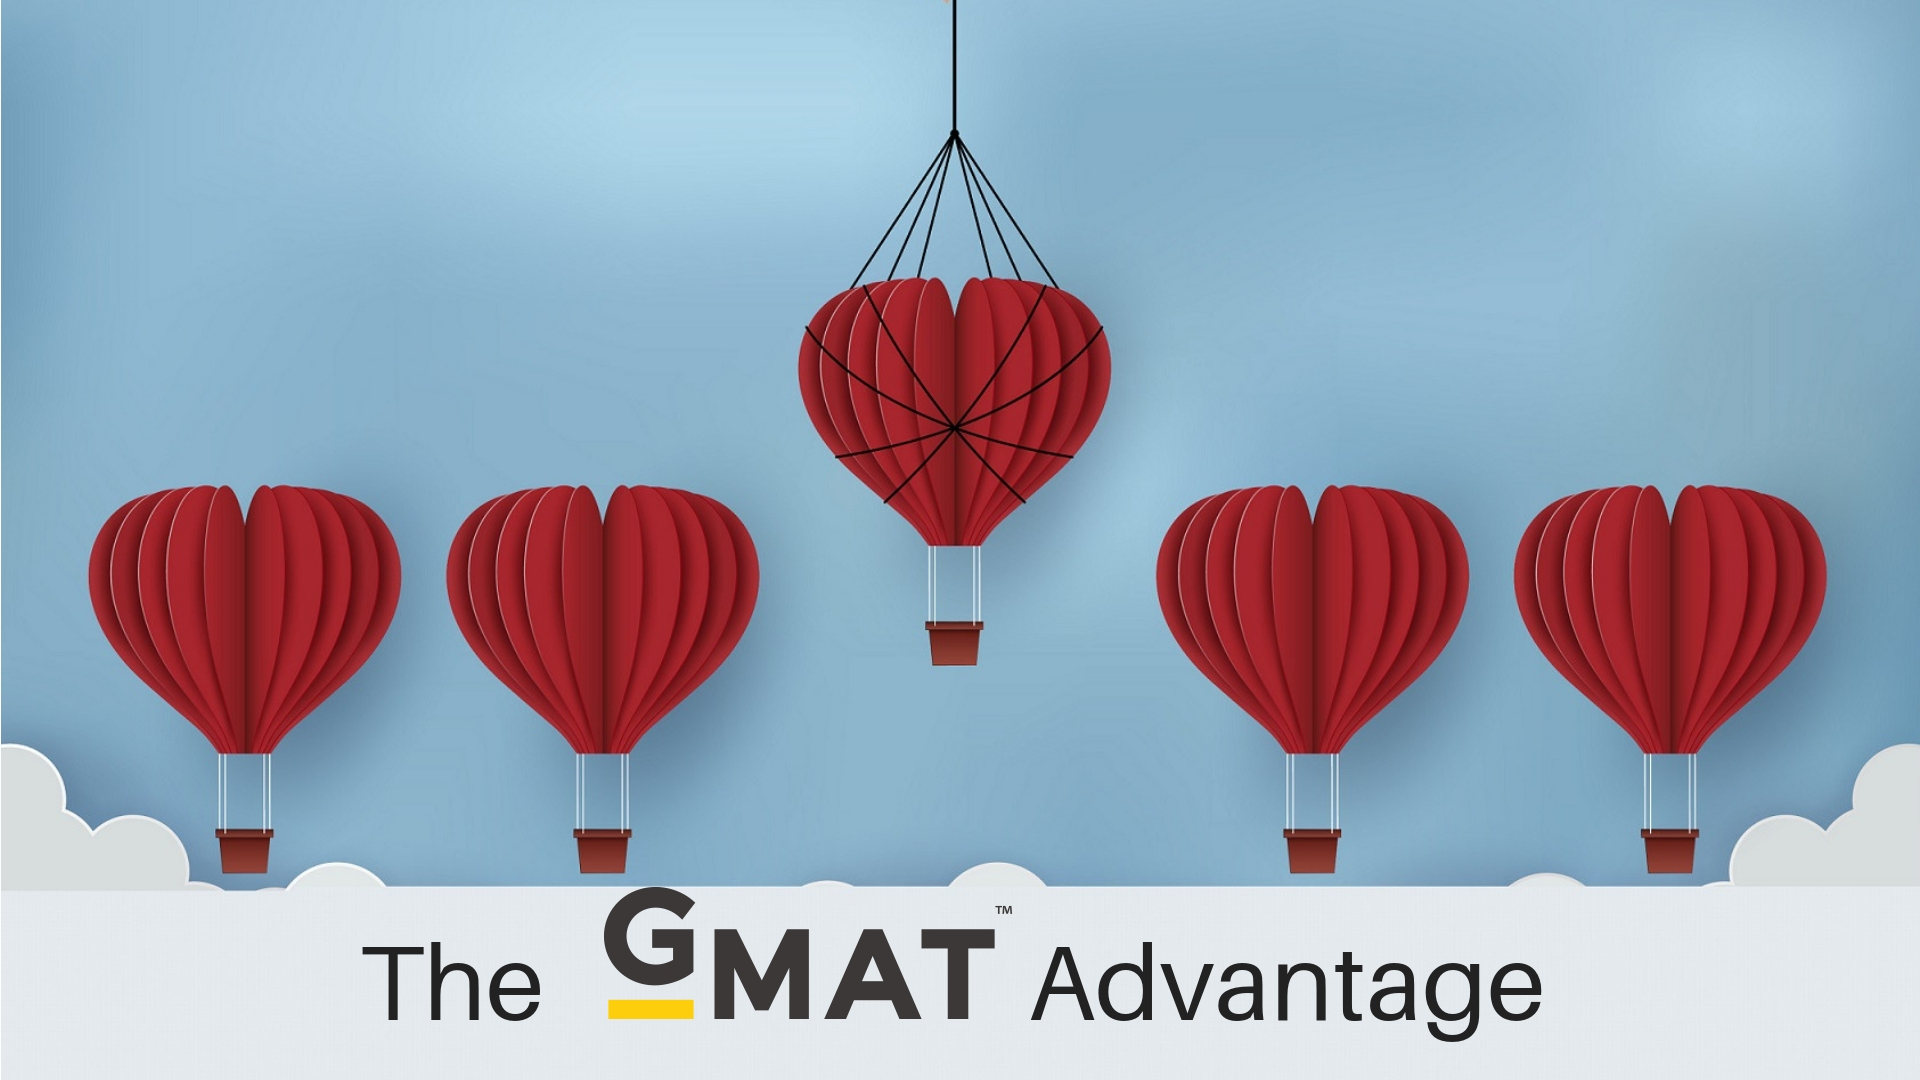 What is the scope of GMAT in India?